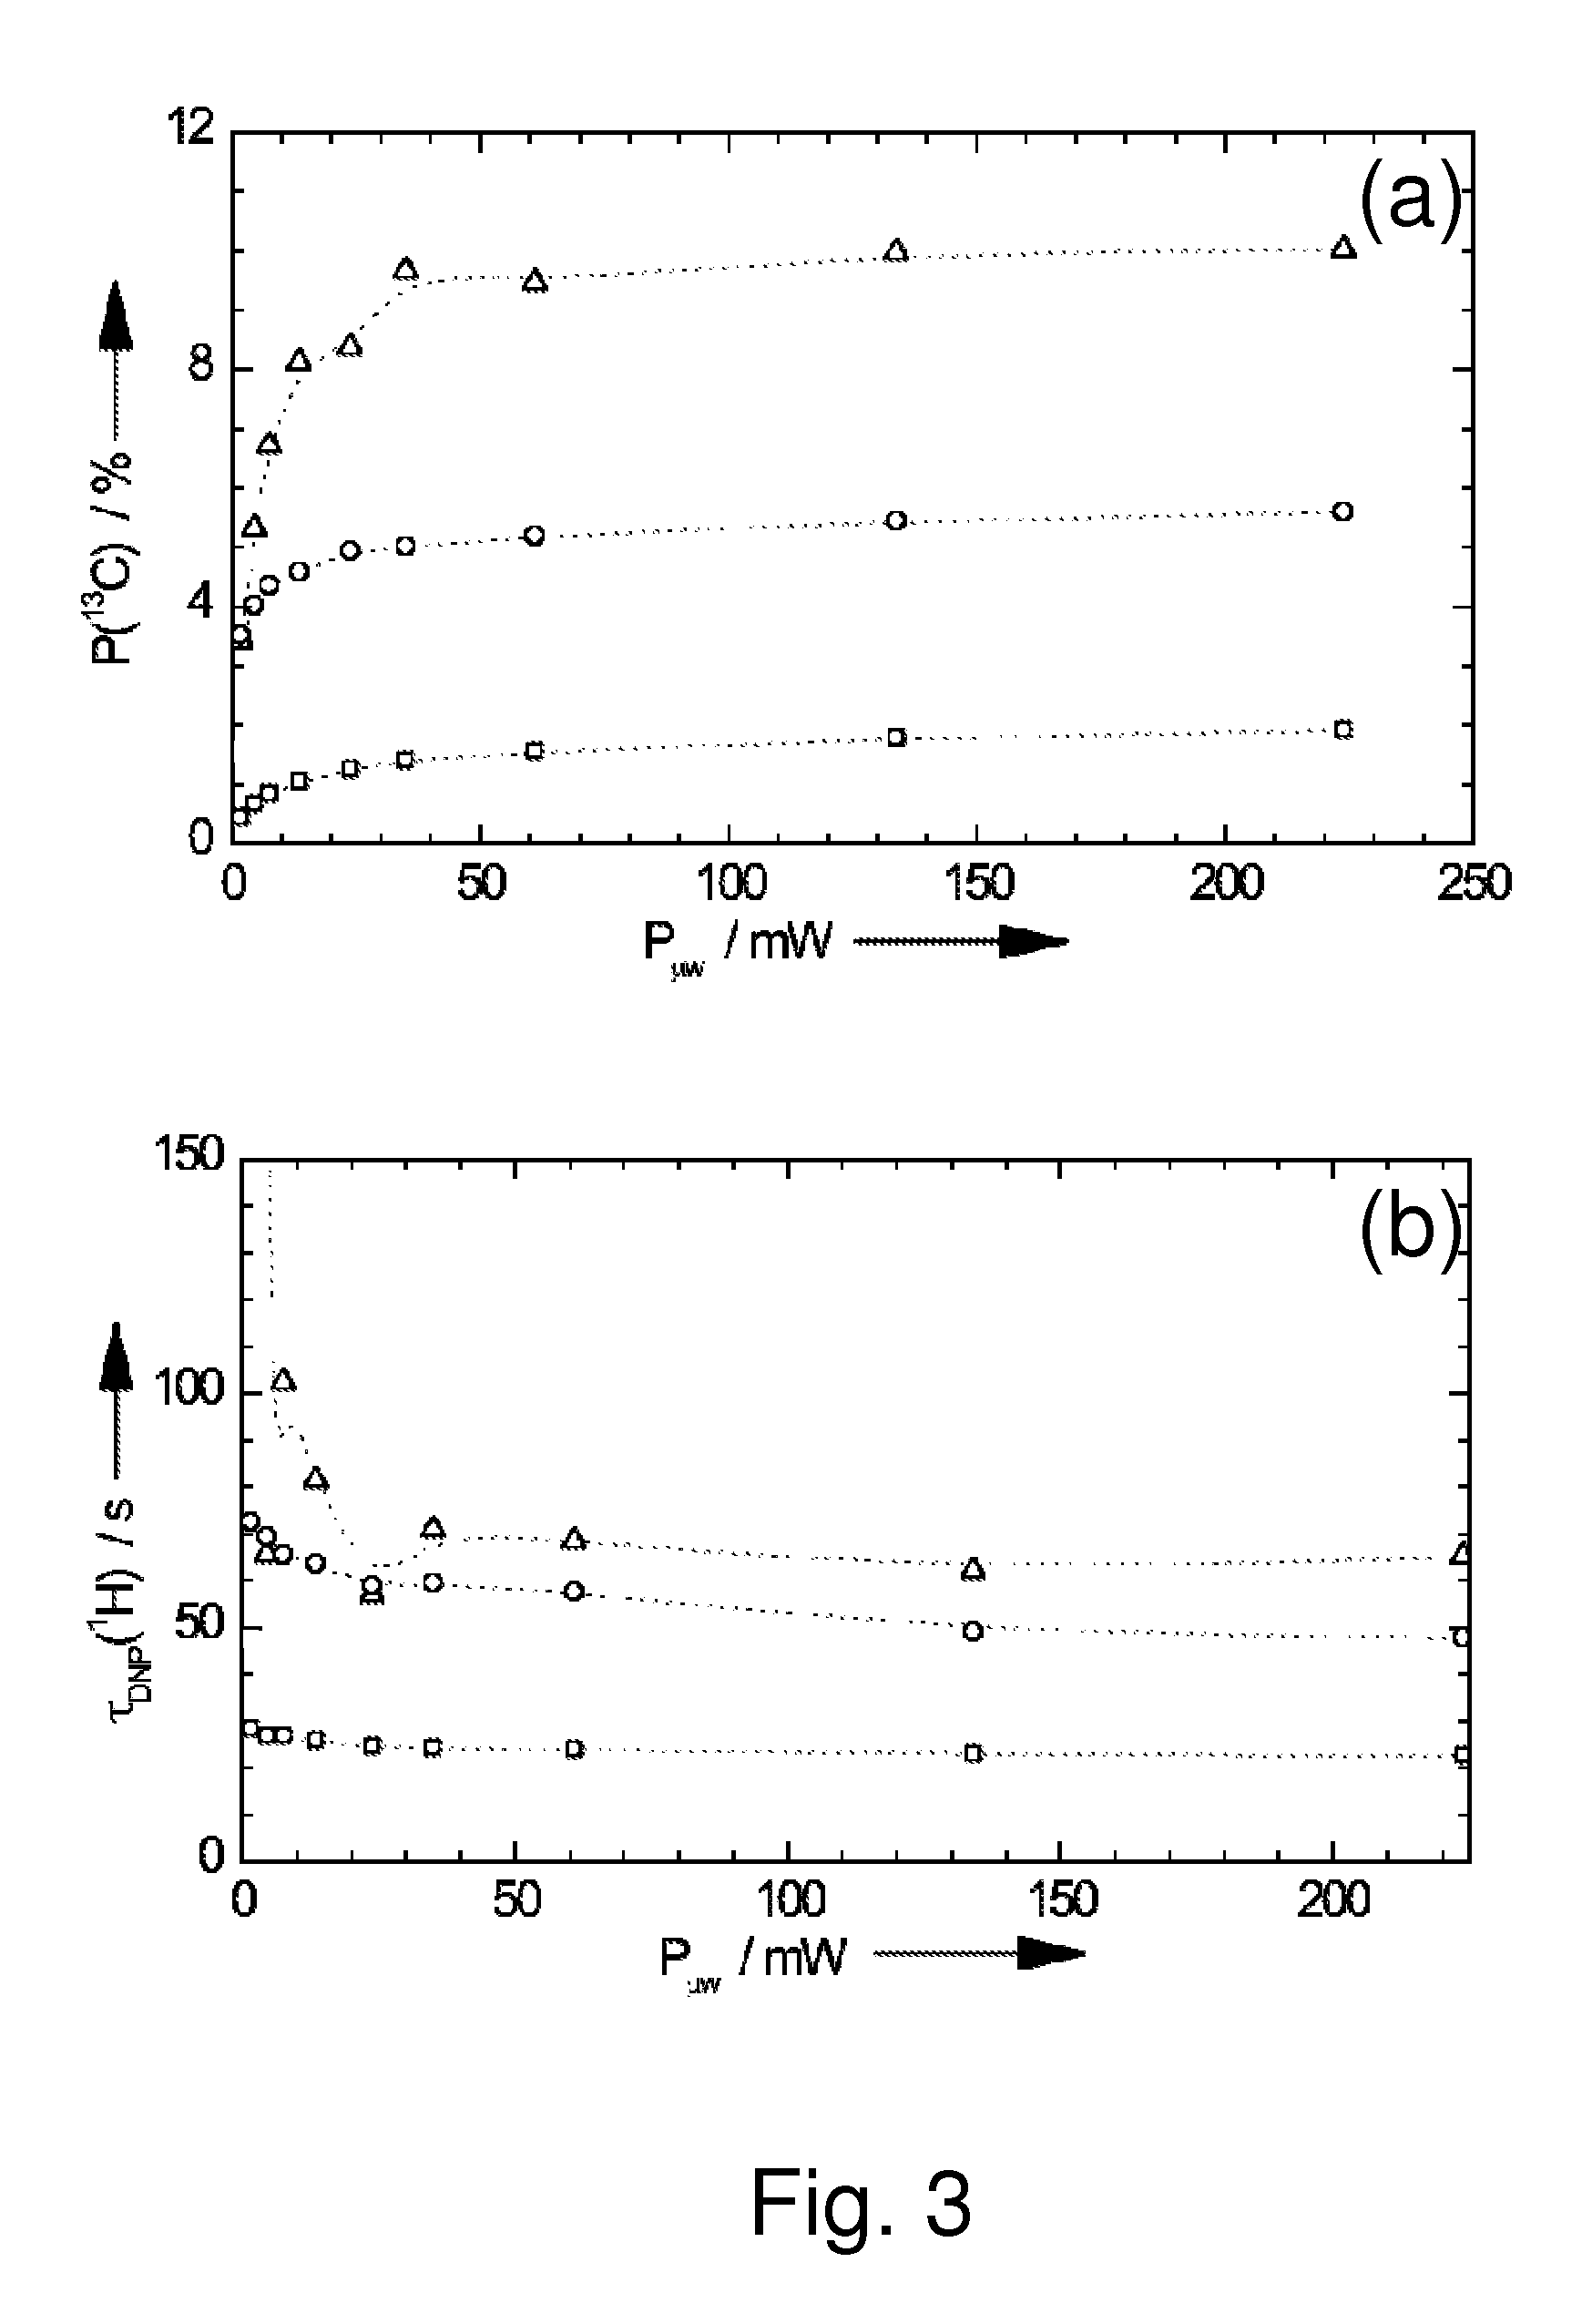 MRI compatible method and device for rapid DNP on a solid state hyperpolarized sample material